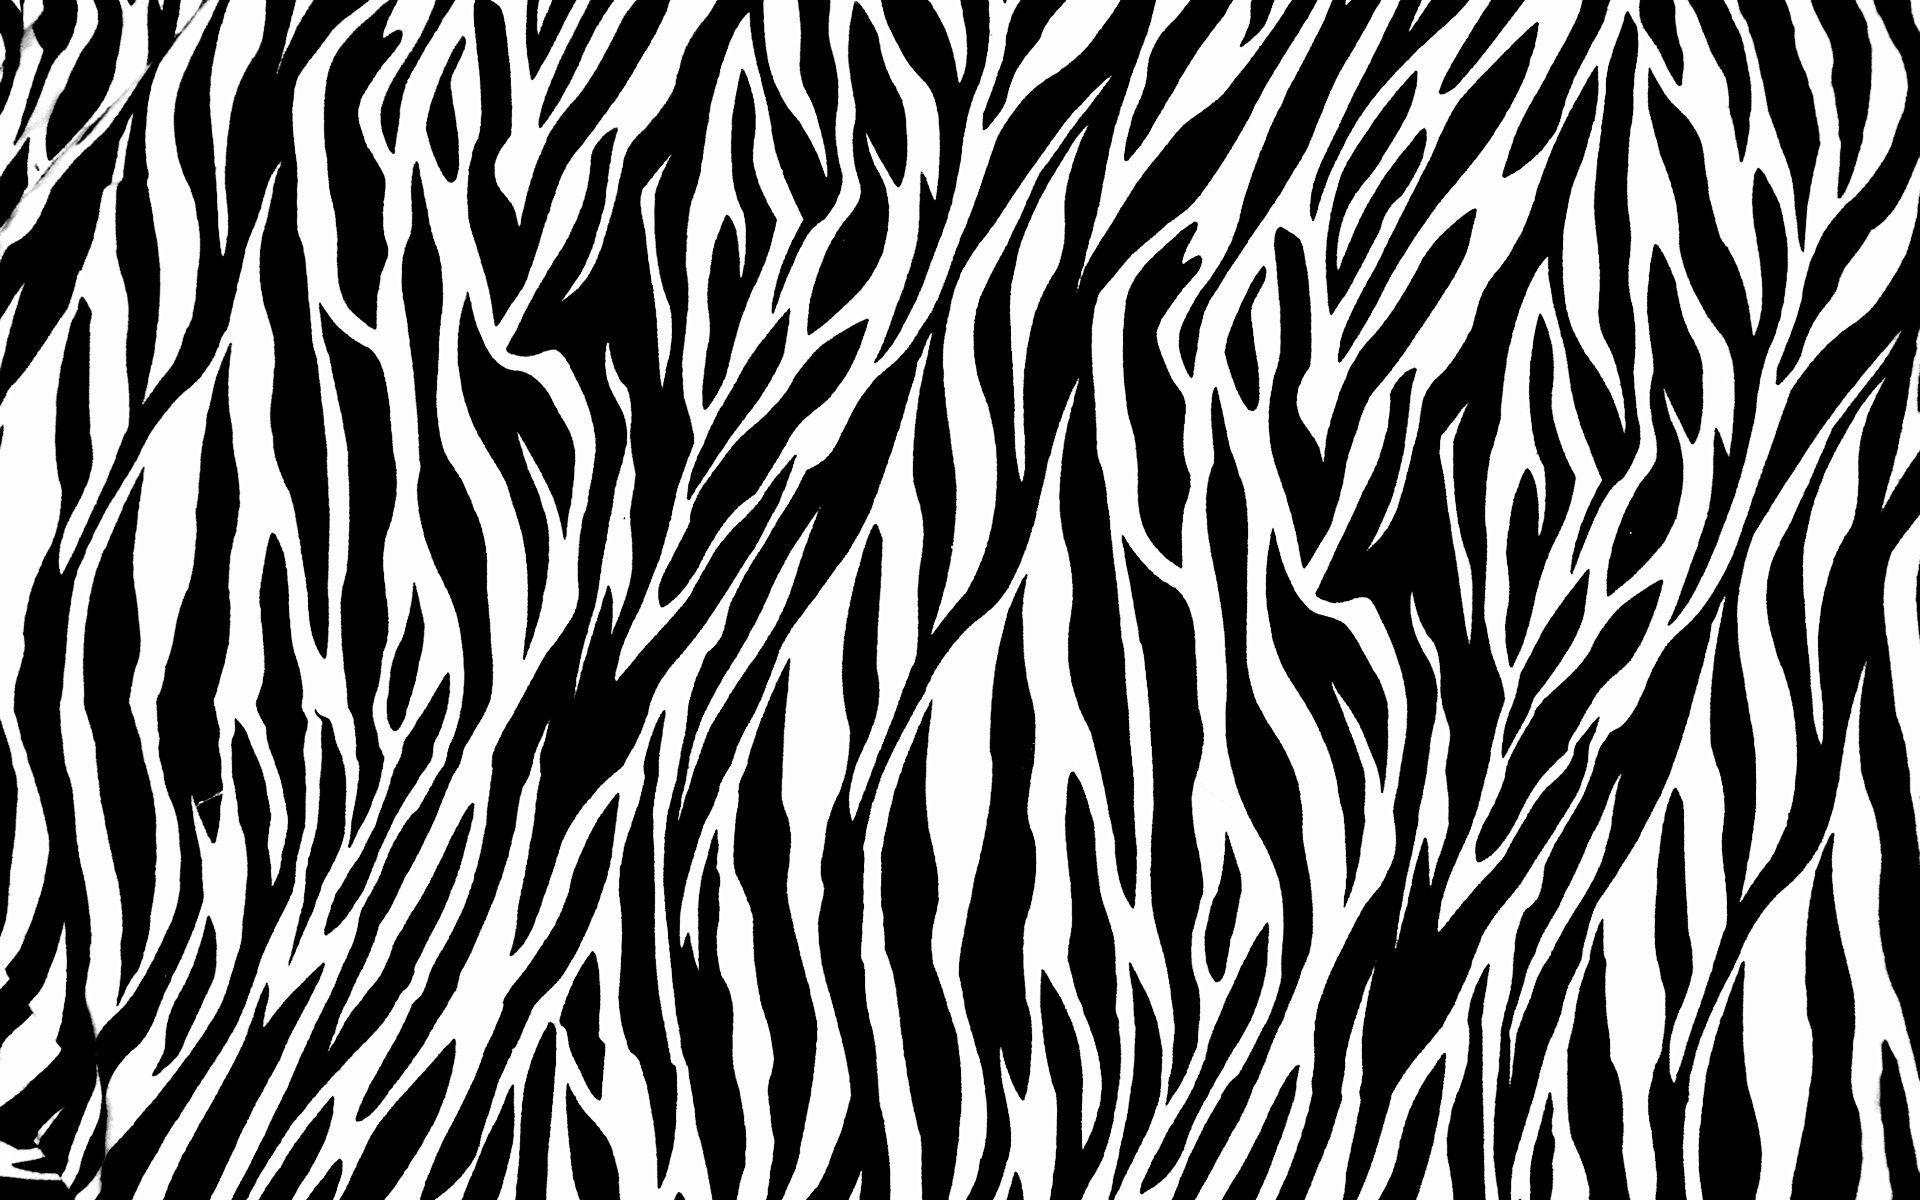 Zebra Wallpaper and Background Image